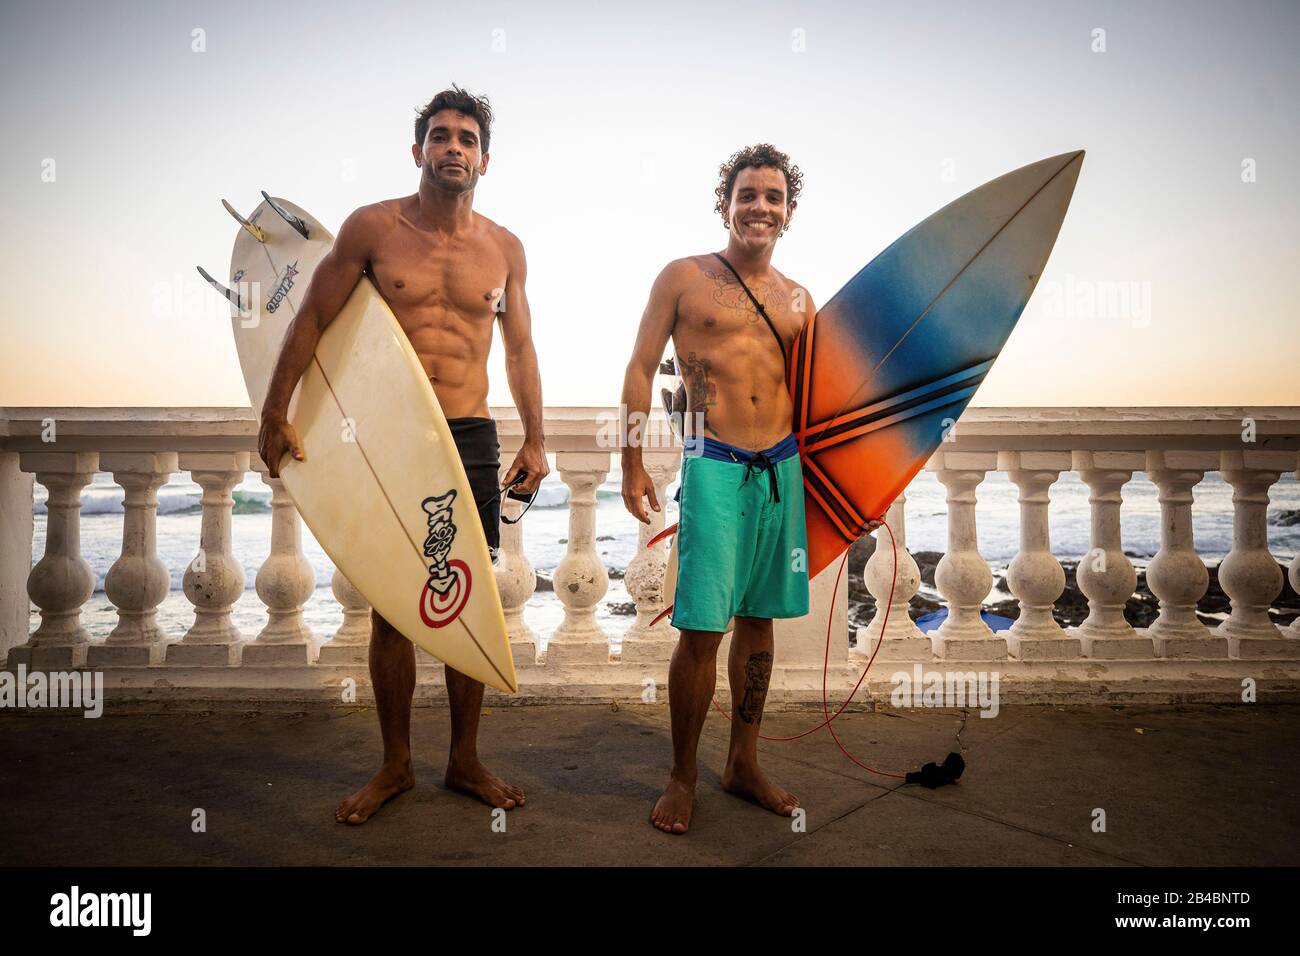 Brazil, state of Bahia, Salvador de Bahia, on the seaside at the end of the day two surfers pose Stock Photo